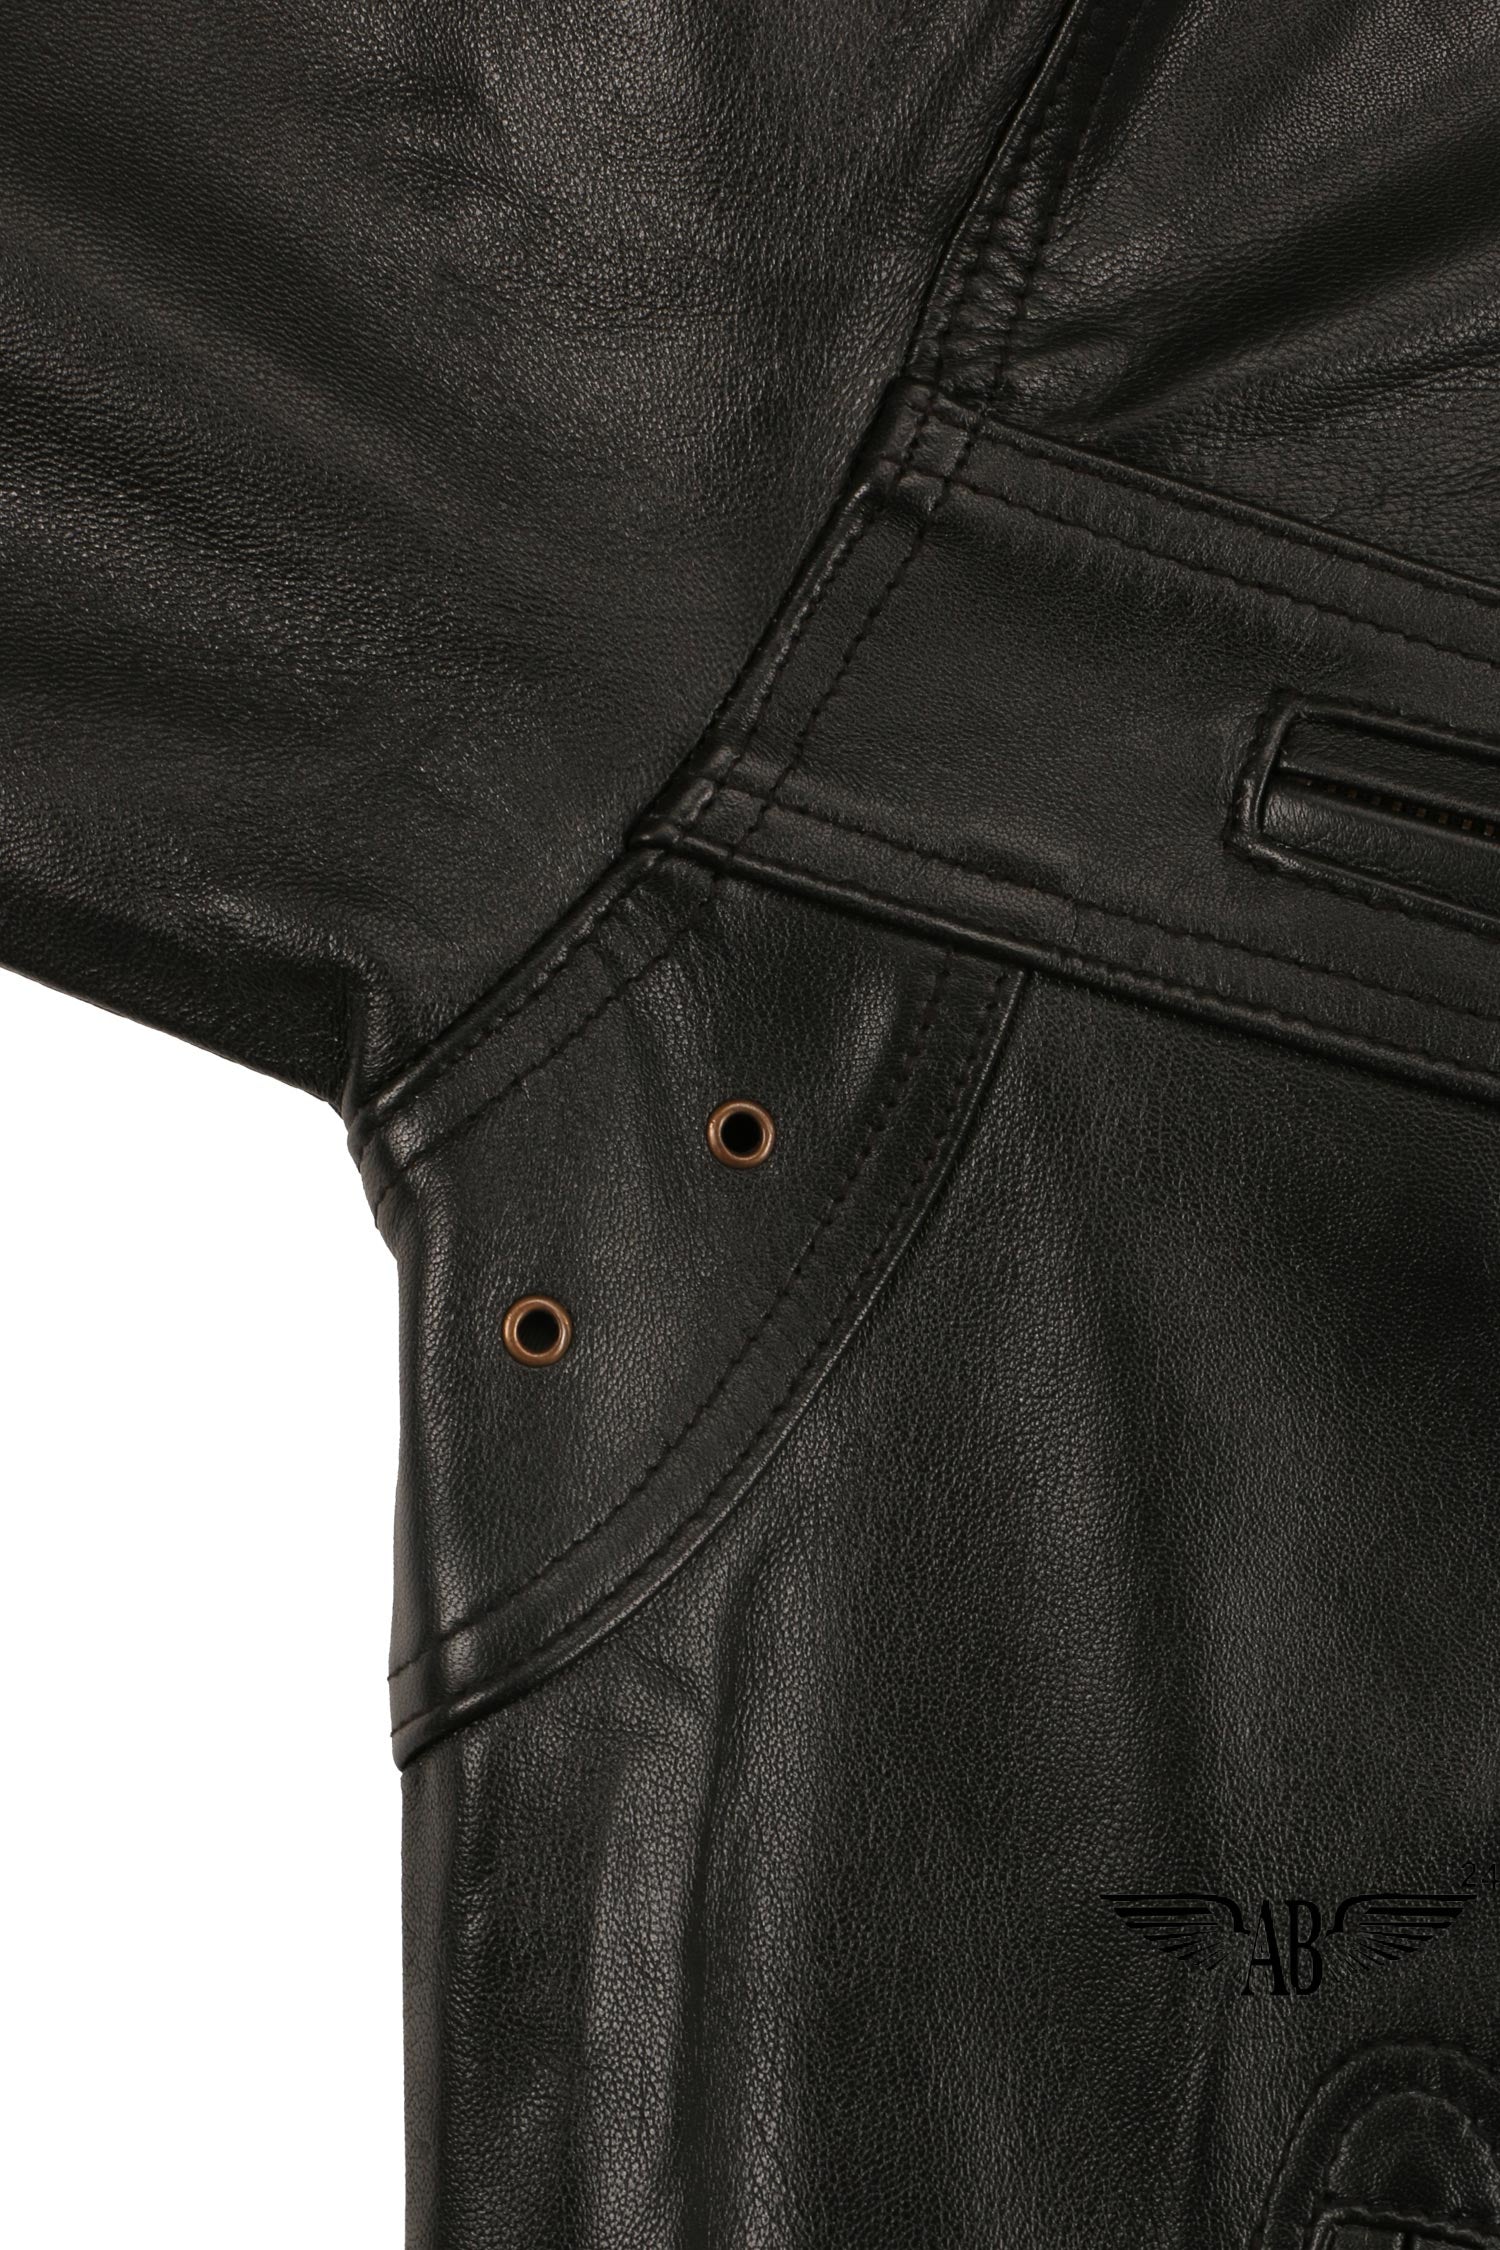 Arm pits of  Bomber jacket displayed. It has two tiny openings, making jacket breathable.